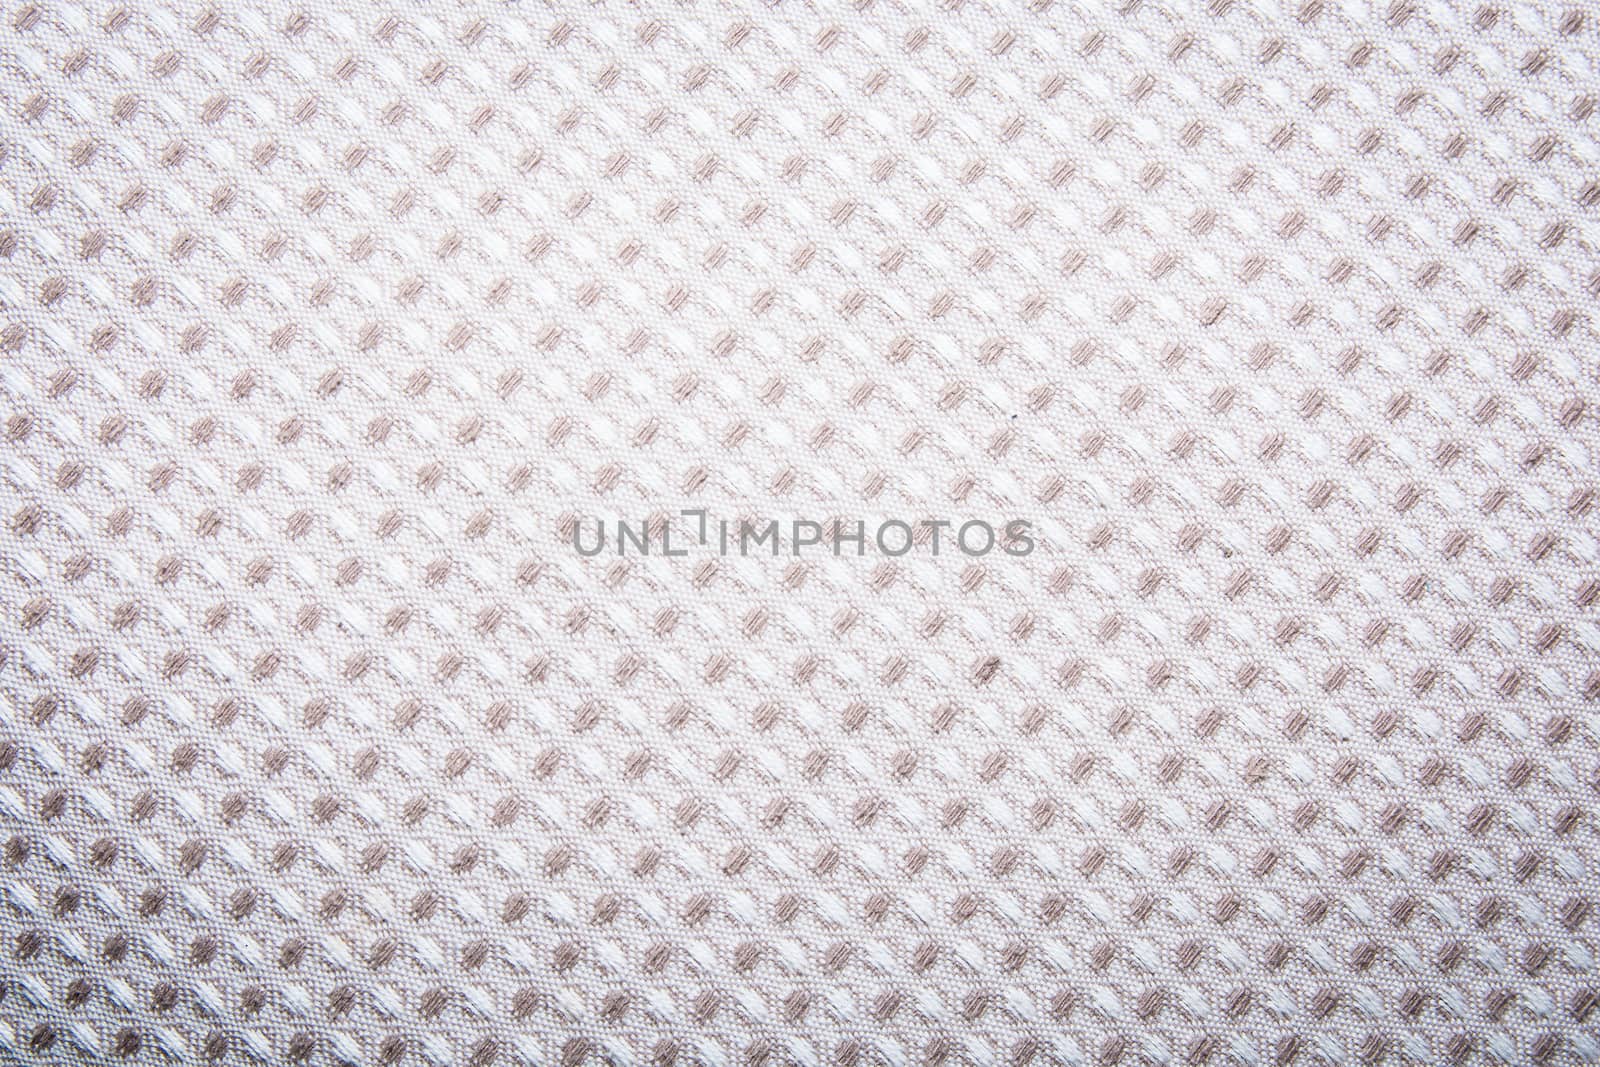 Texture of vintage seamless fabric pattern background